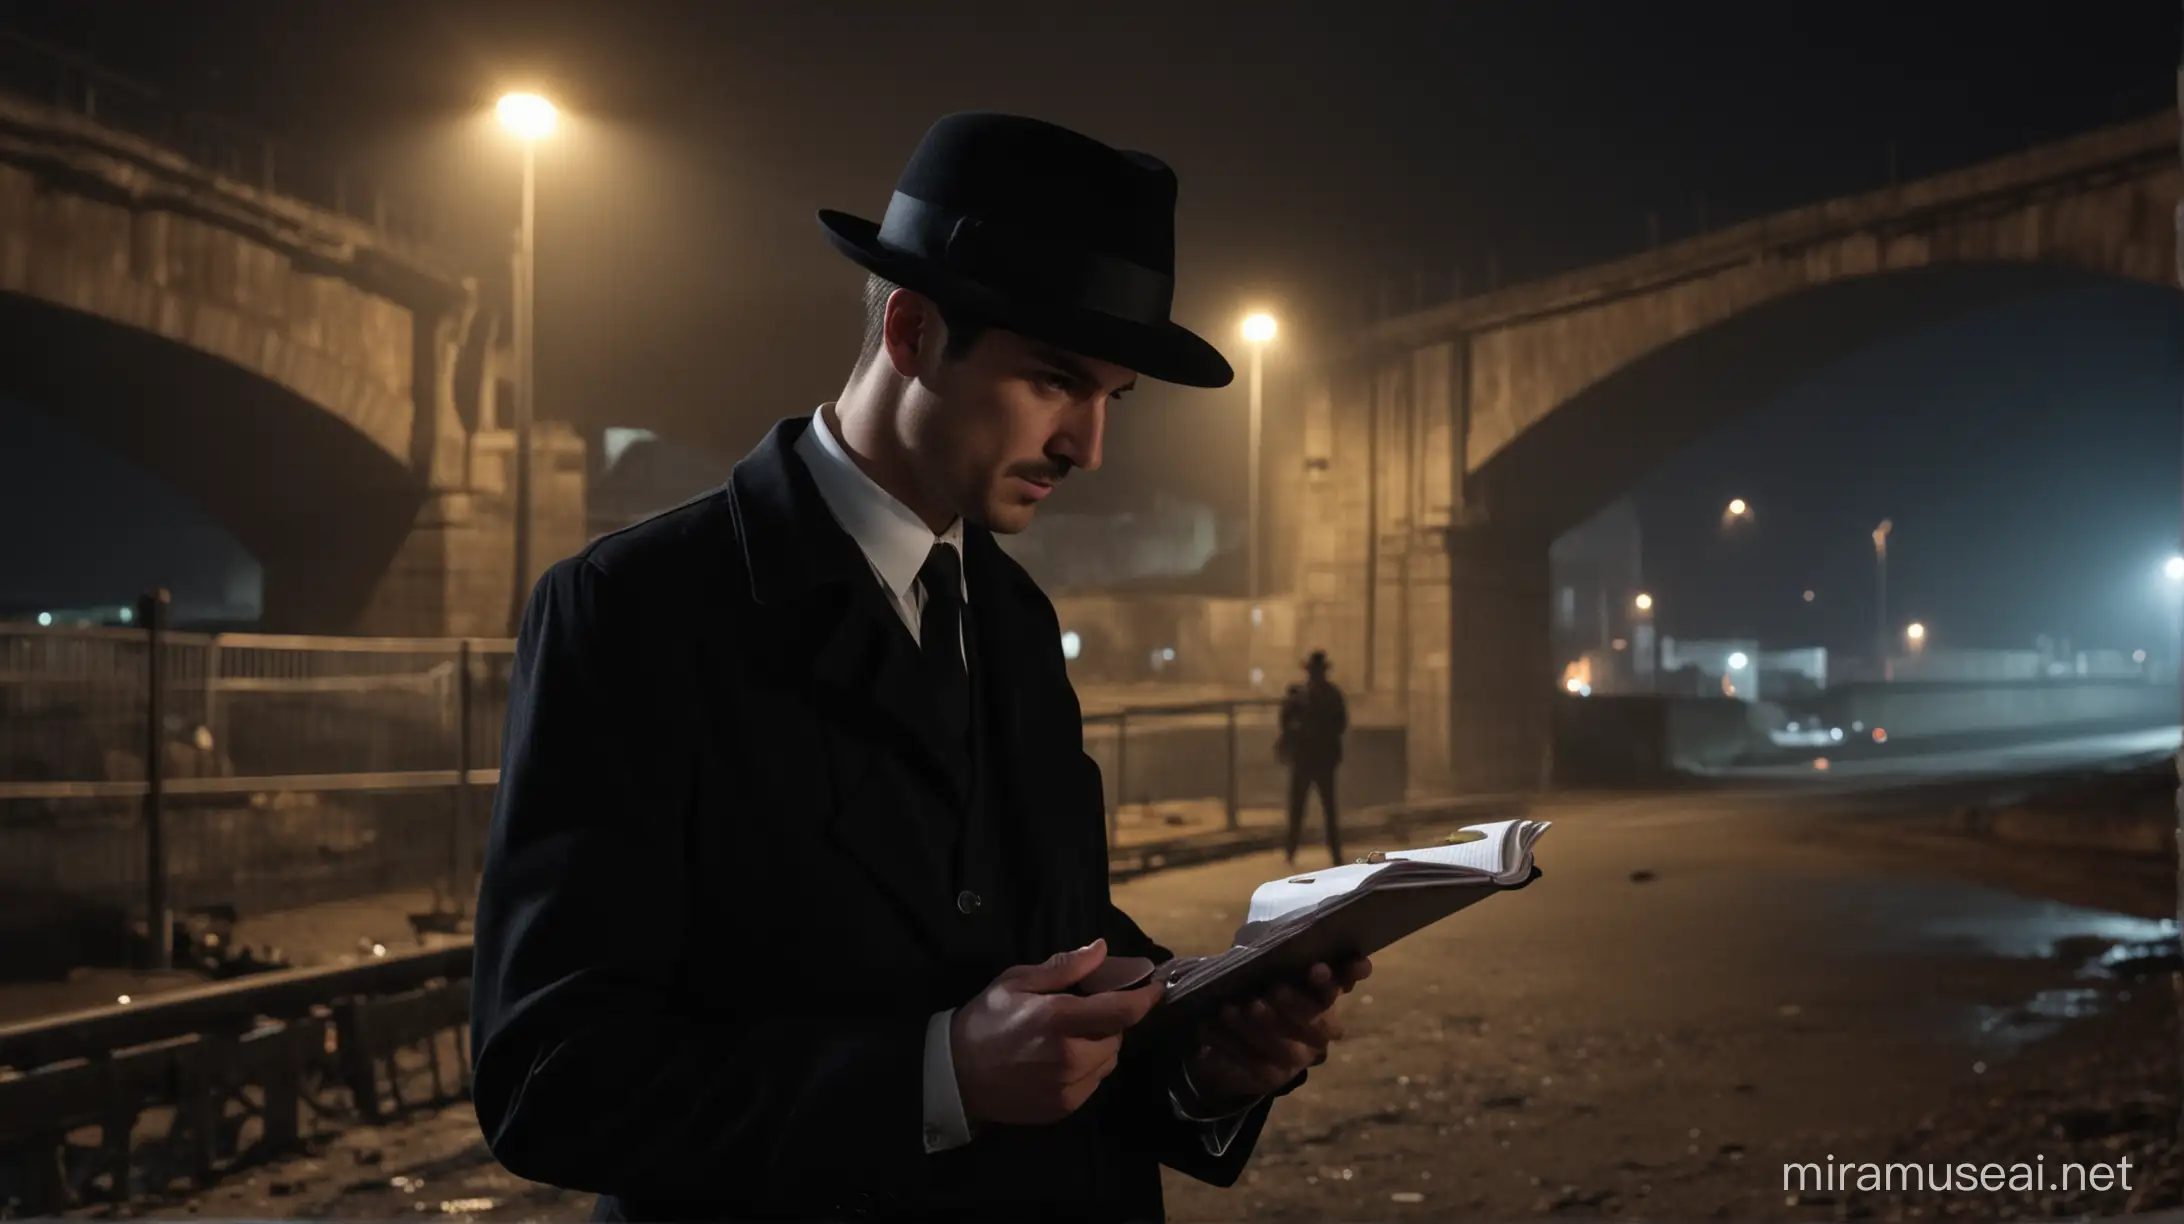 detective with black hat on head with notebook in hand suspecting at crime scene at night under a bridge